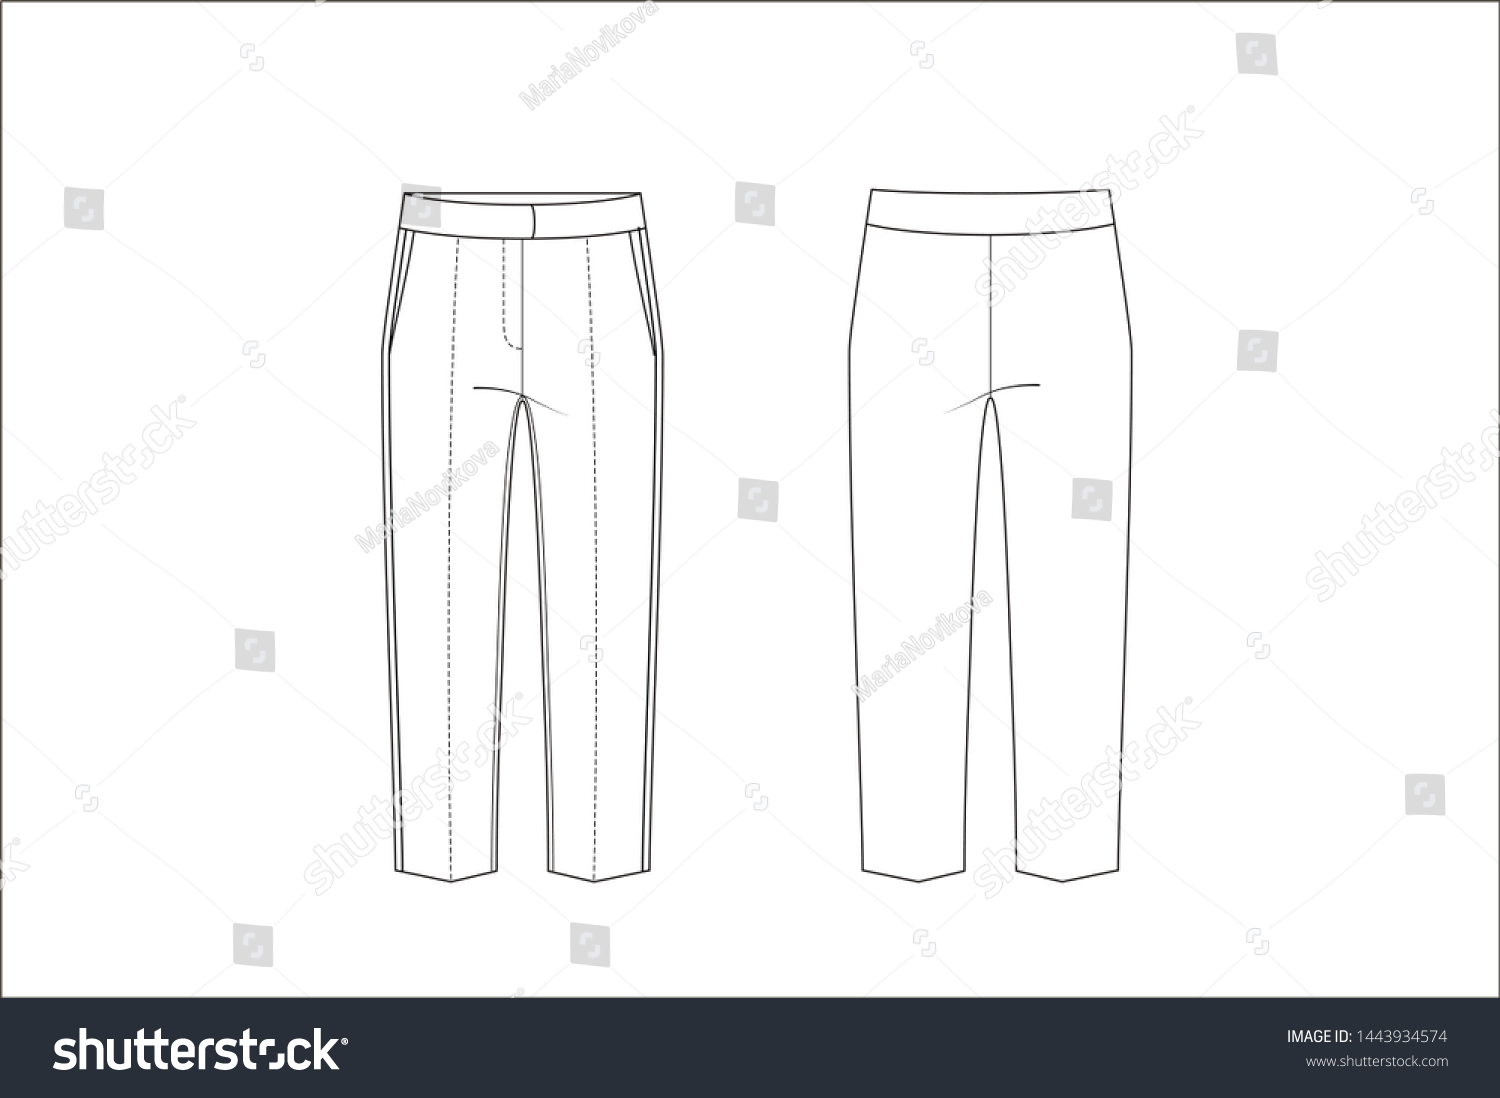 607 Chino drawing Images, Stock Photos & Vectors | Shutterstock